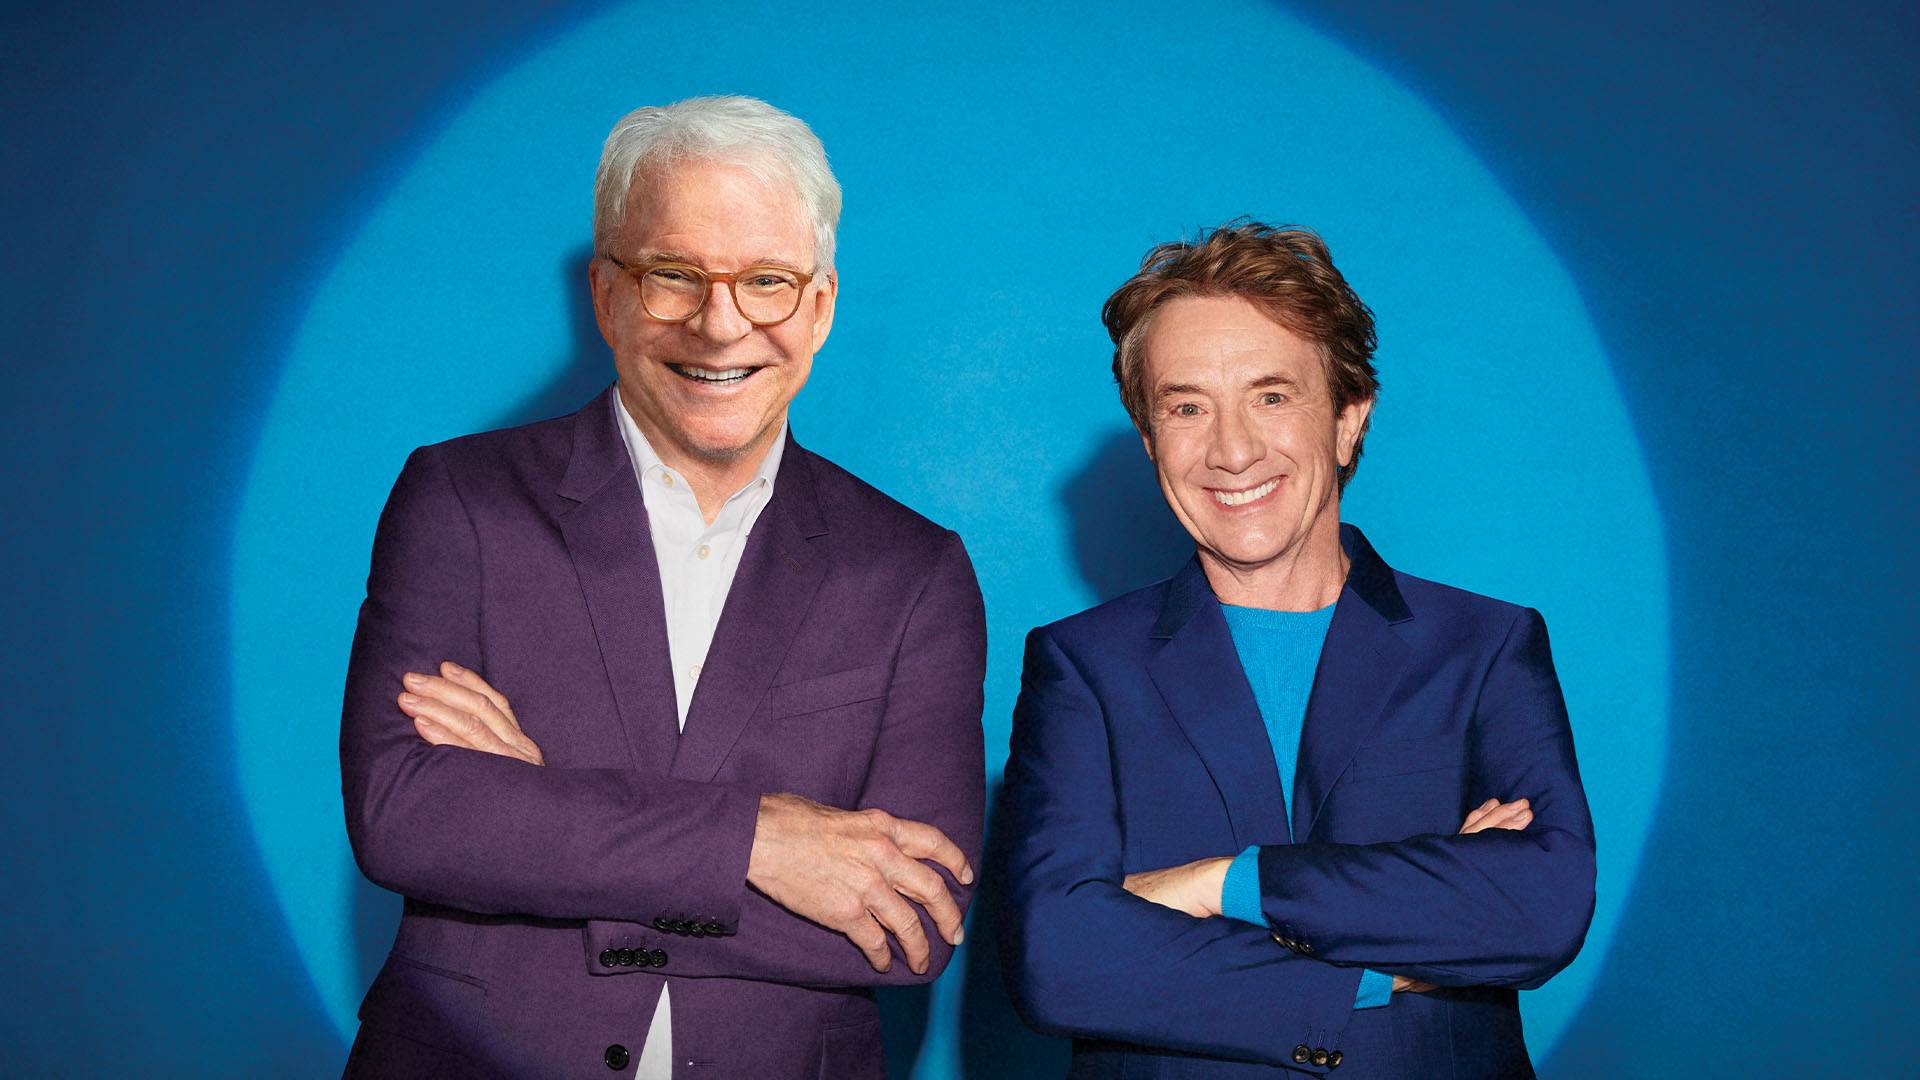 Steve Martin & Martin Short stand together with their arms crossed against a blue wall illuminated by a spot light. They are both caucasian men. Steve Martin, on the left, has white hair, glasses and a plum colored jacket. Martin Short, on the right, has reddish brown hair and a blue jacket.